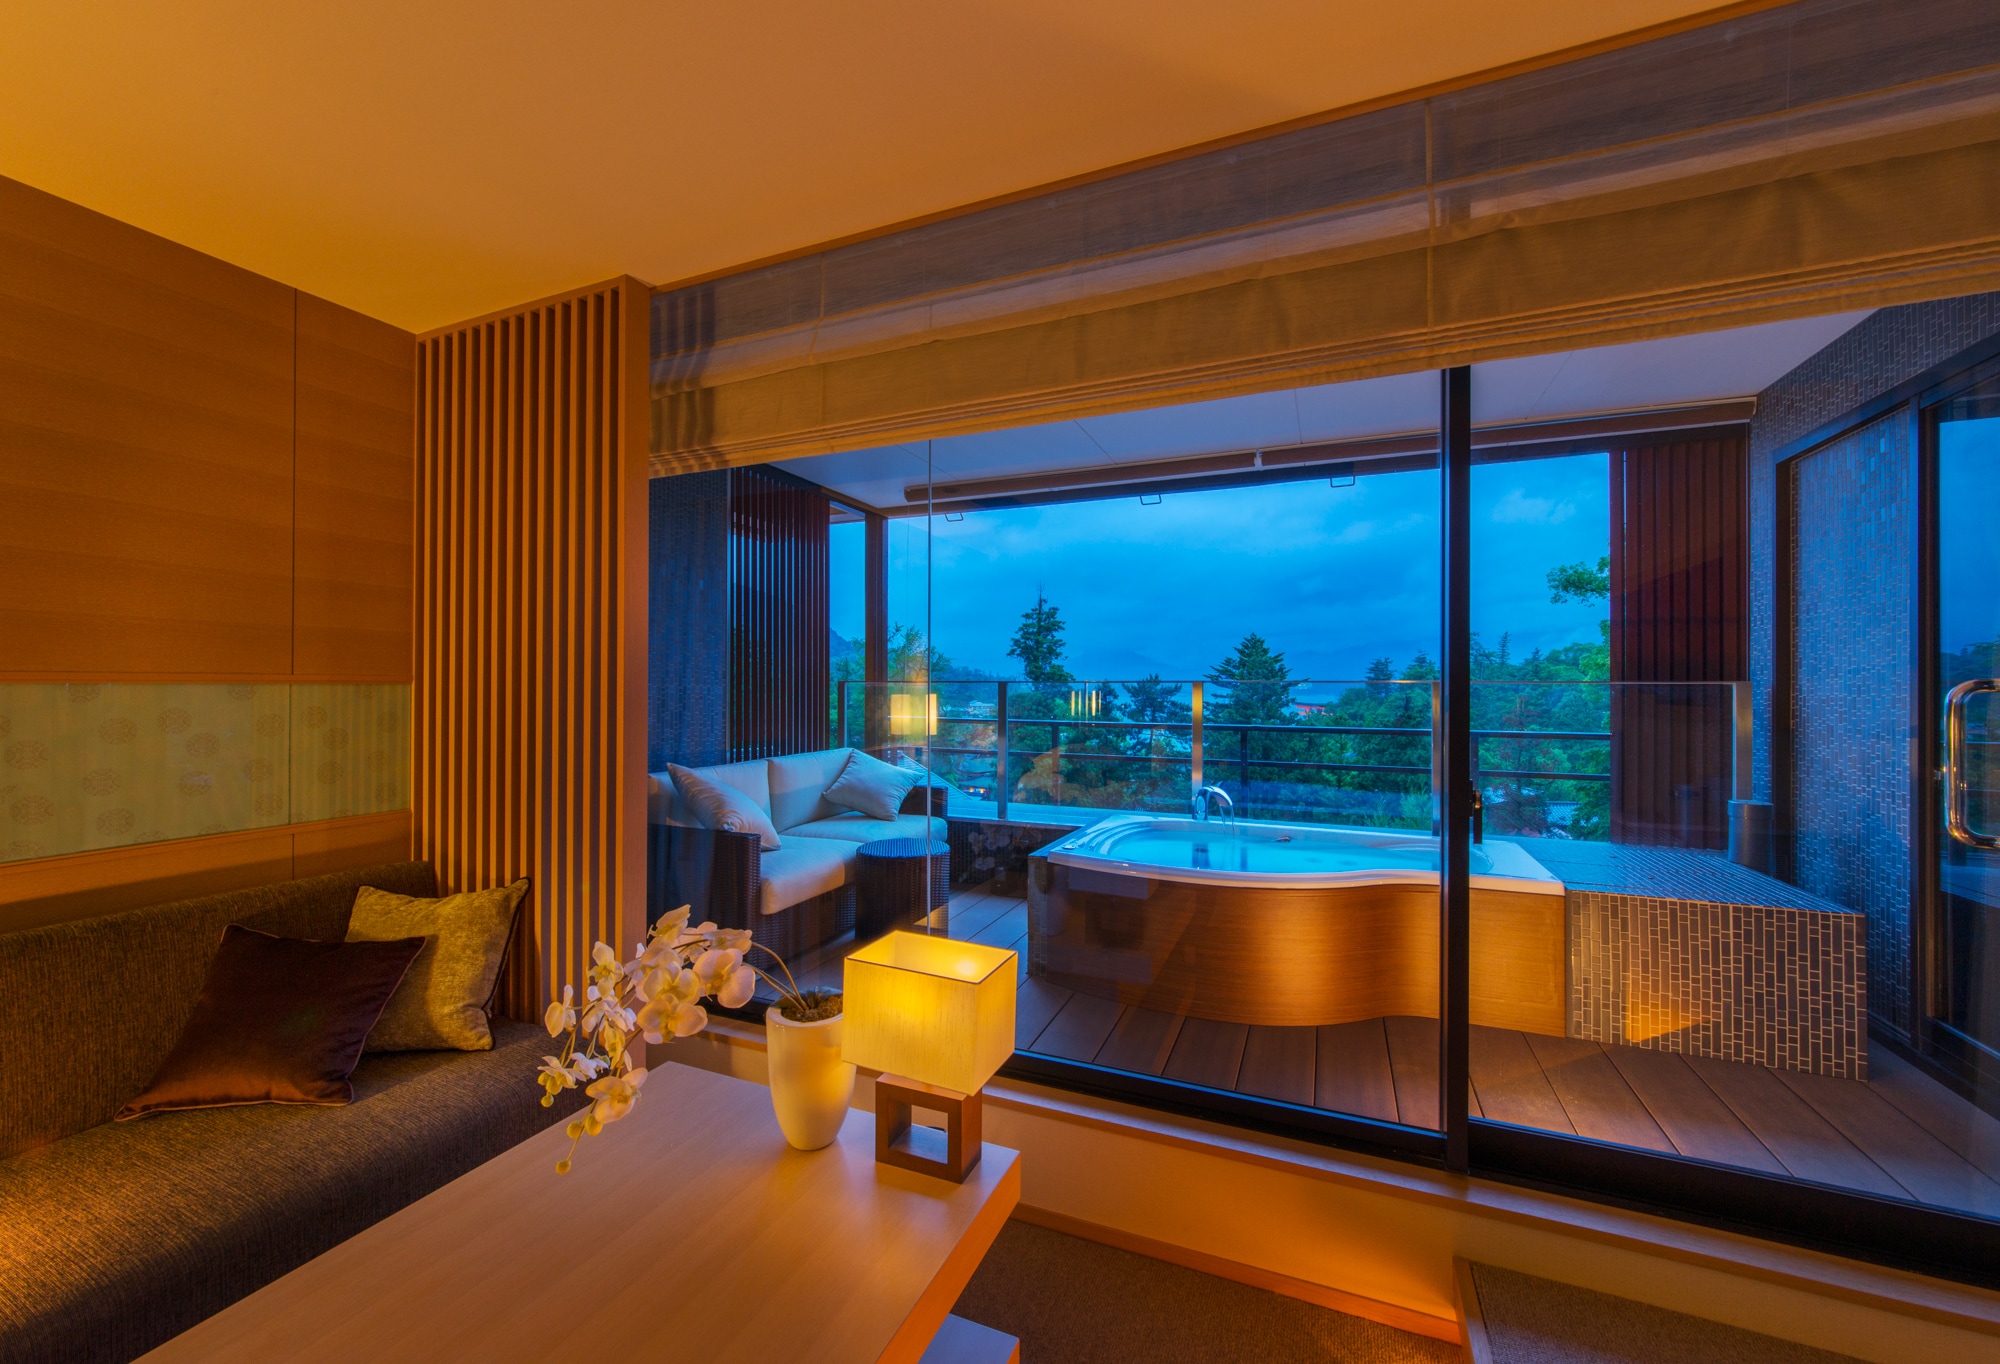 Enjoy the view of Miyajima from the window open to the sea side and the open-air bath